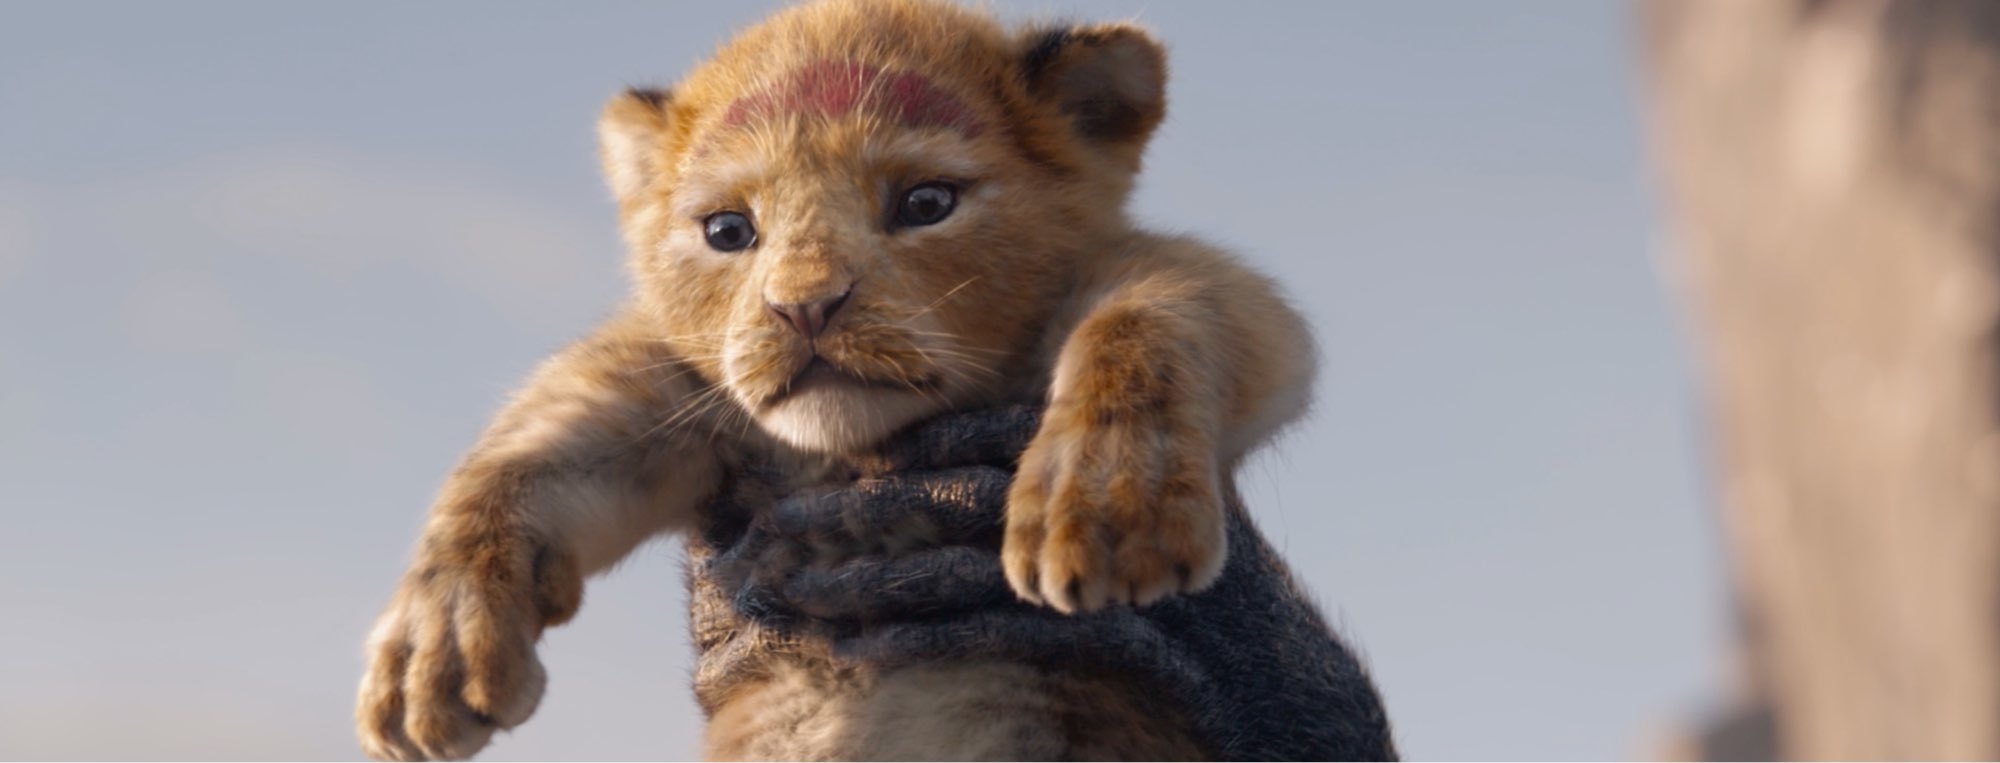 download the making of the lion king 2019